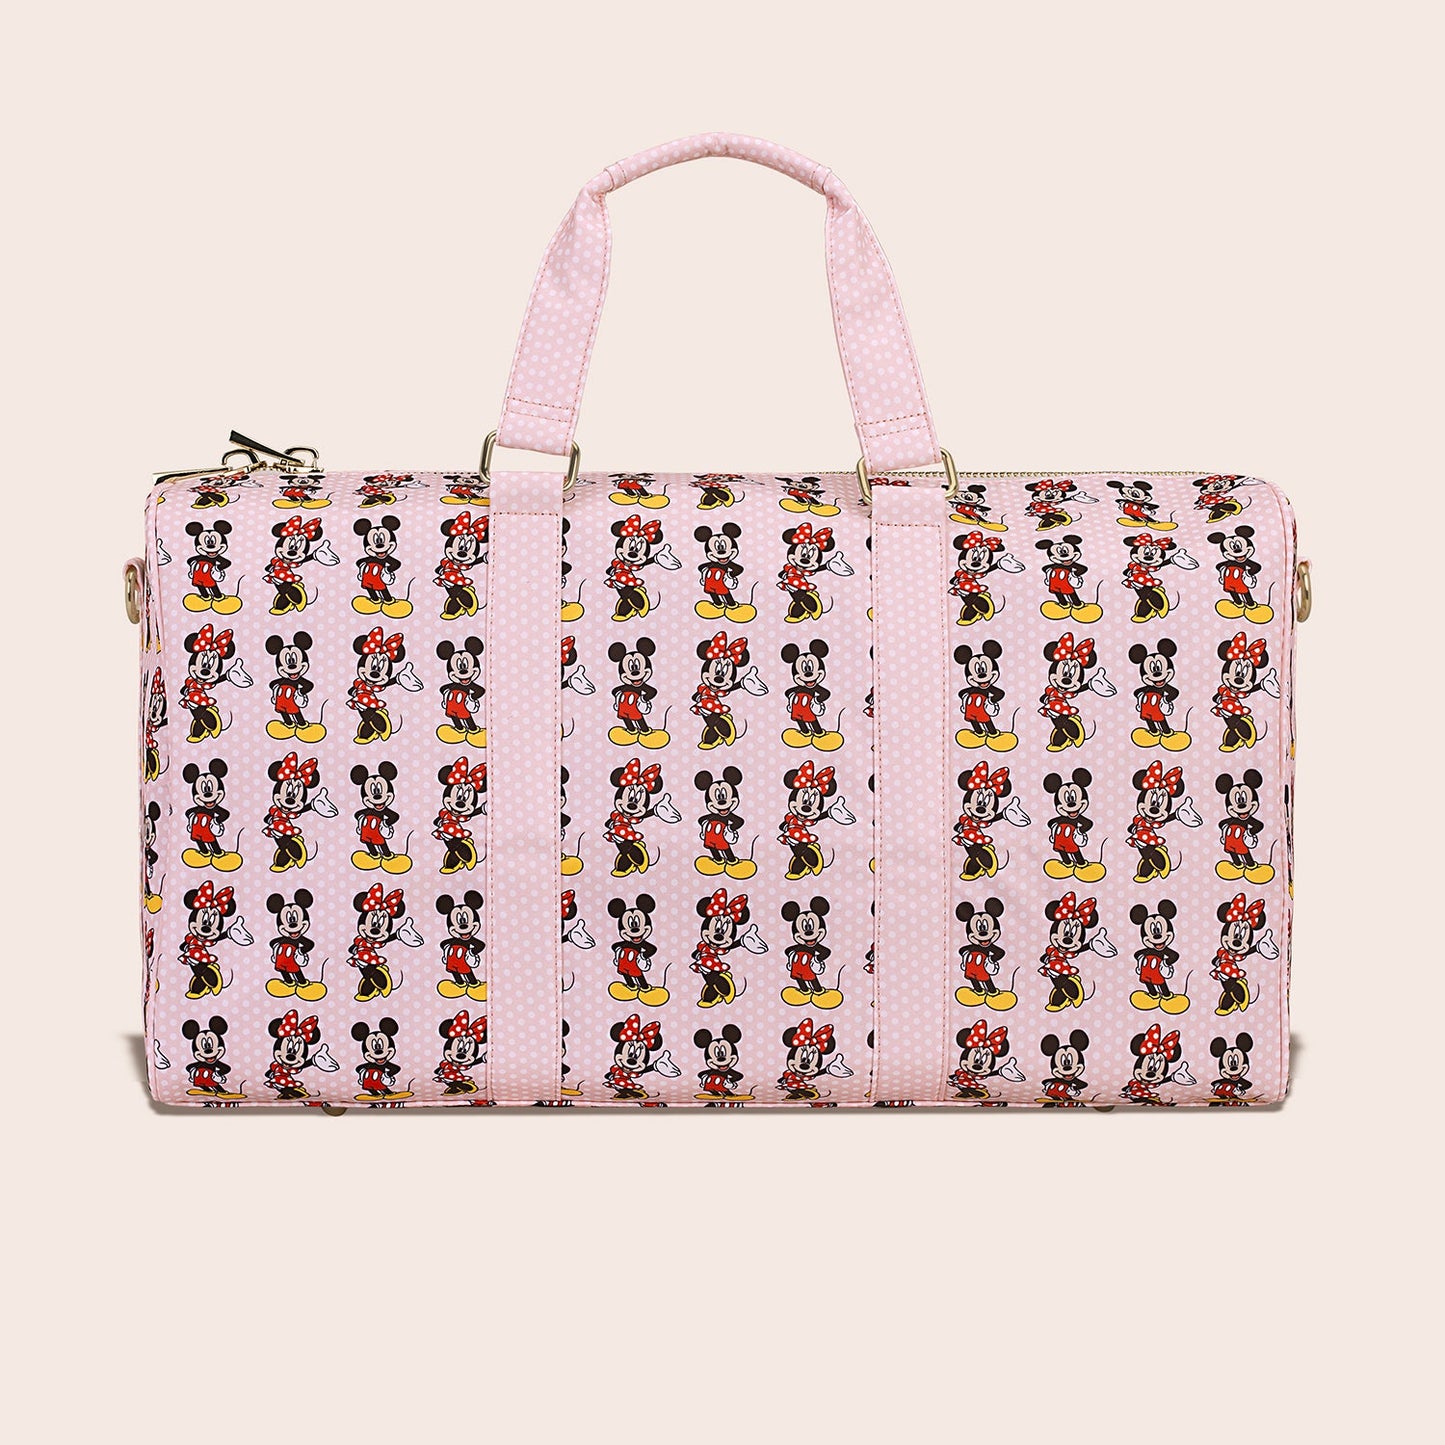 Mickey & Minnie Mouse Duffle Bag